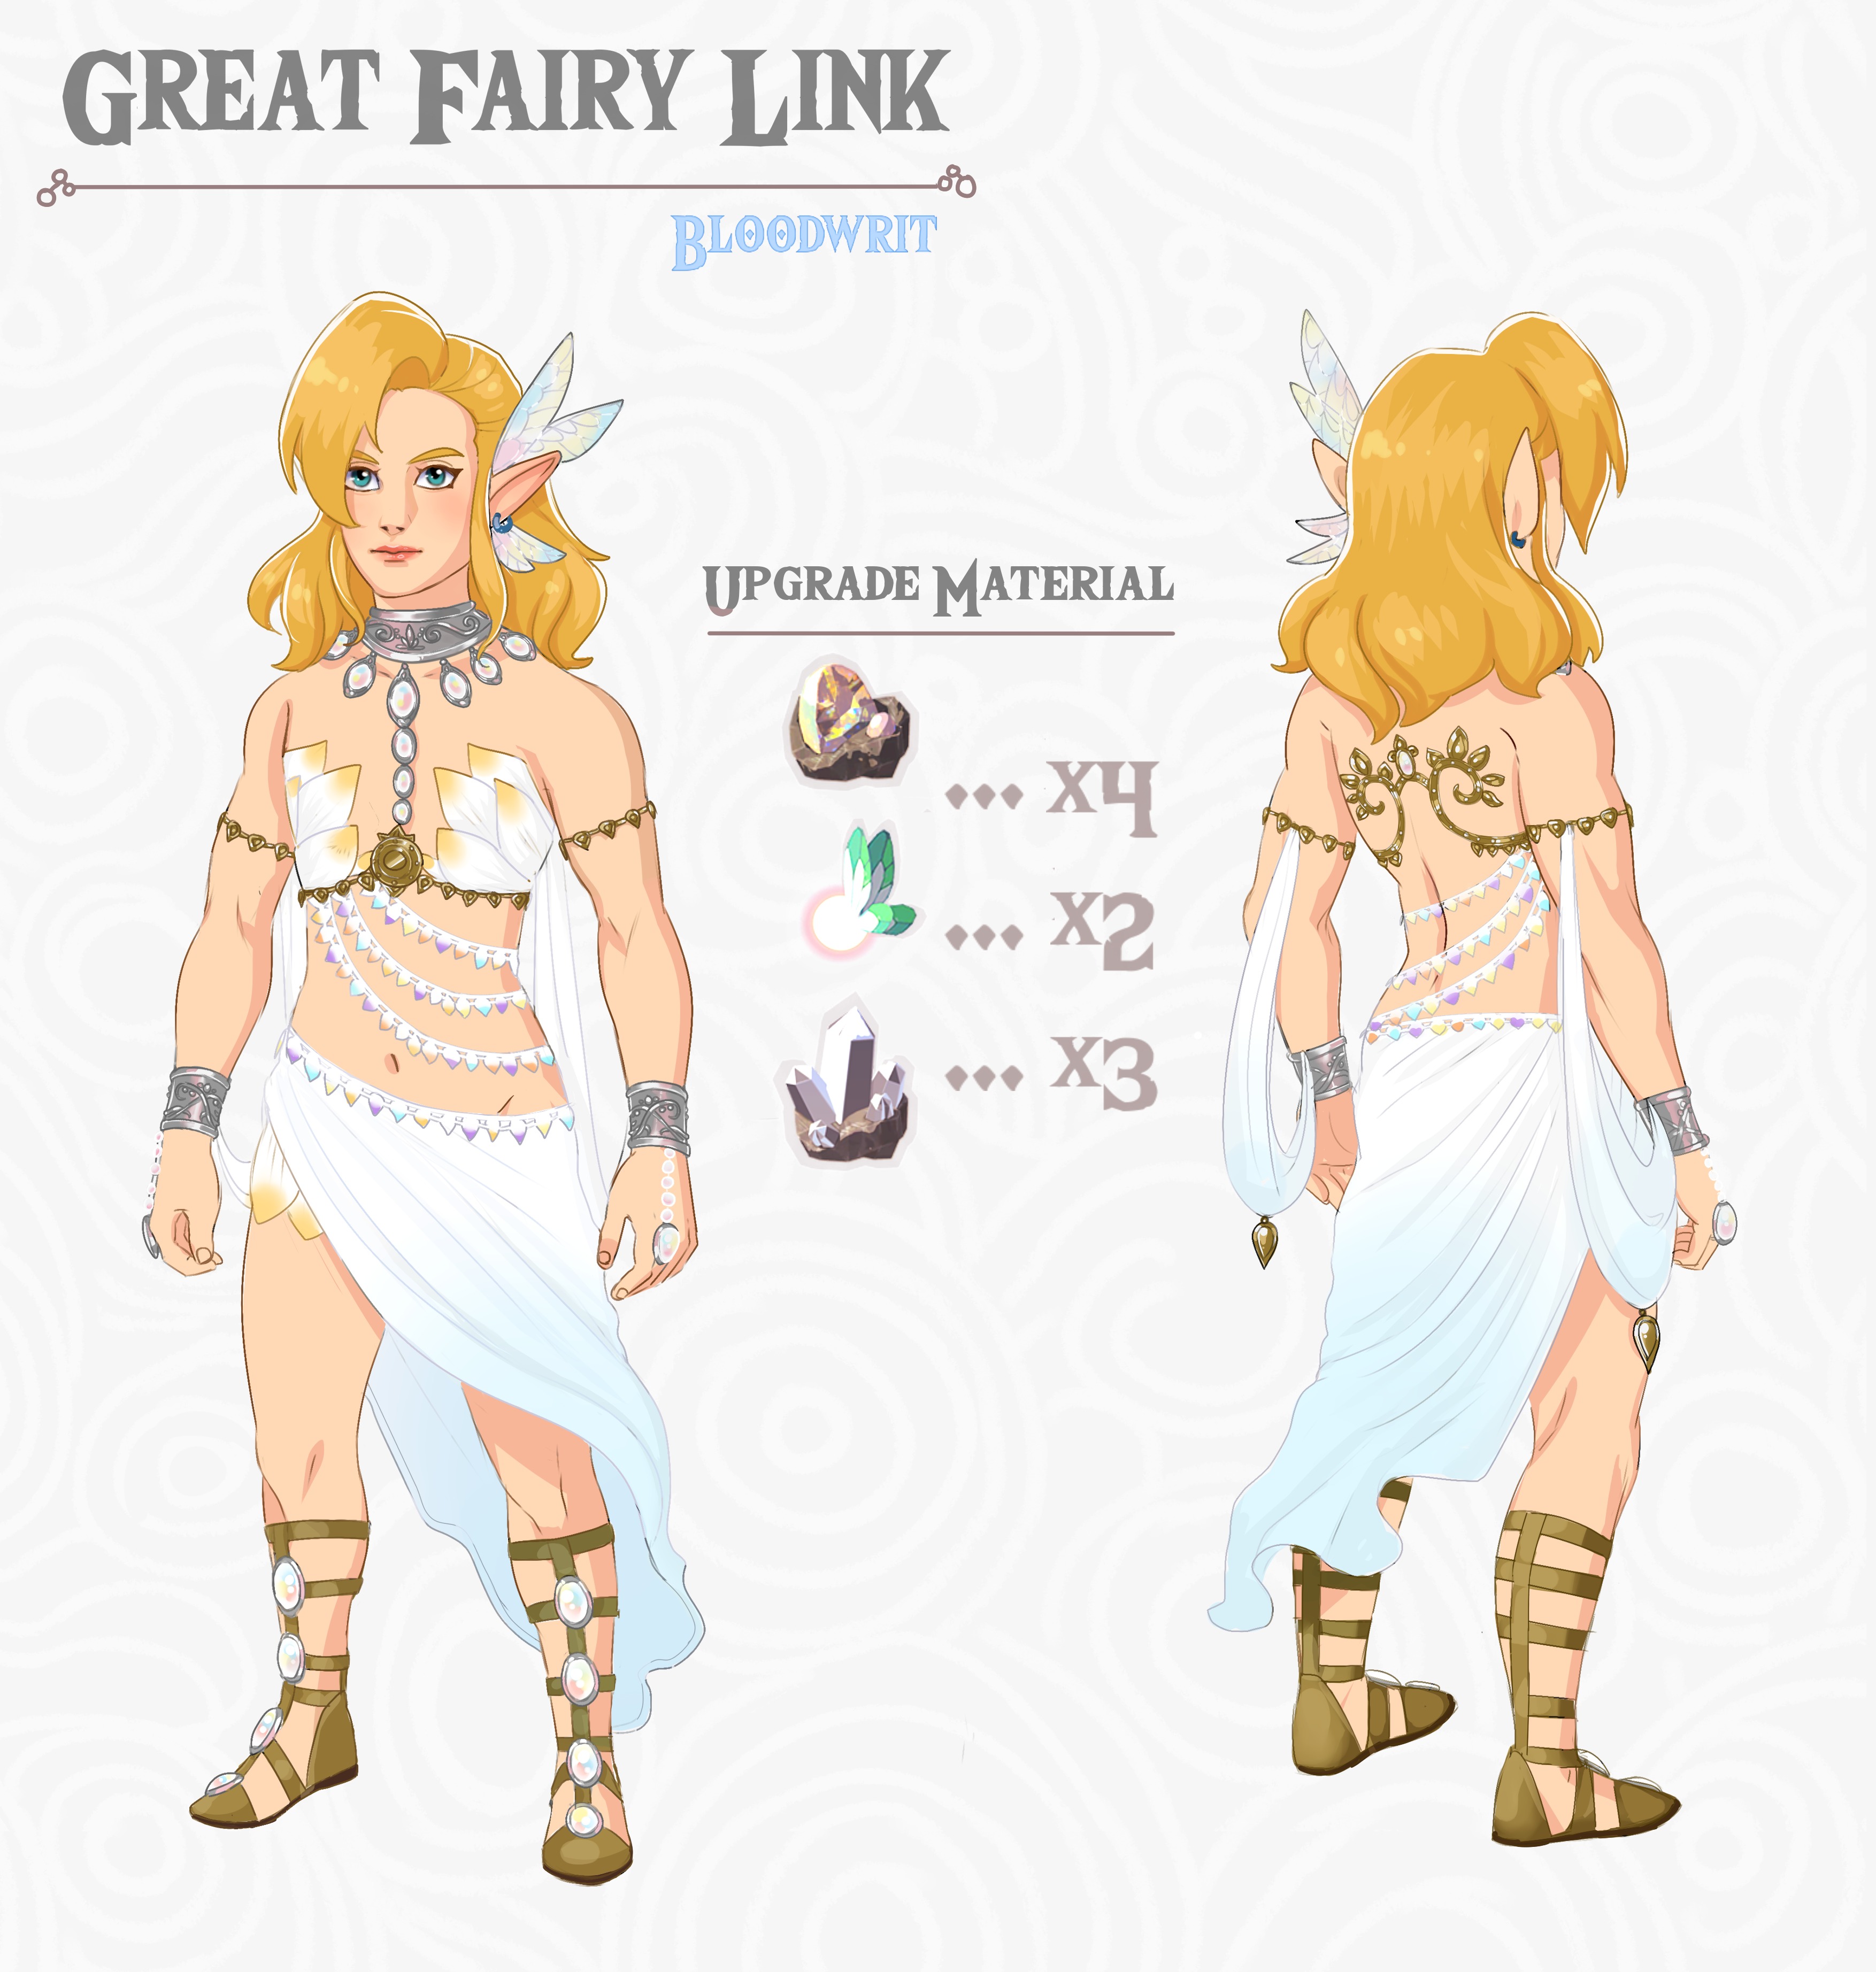 Vic he/him 🏳️‍⚧️🏳️‍🌈 on X: "It's finally done! I worked.. so hard on  this 8') I hope you all like my Great Fairy Link costume &amp; Weapons! It  doesn't have great armor